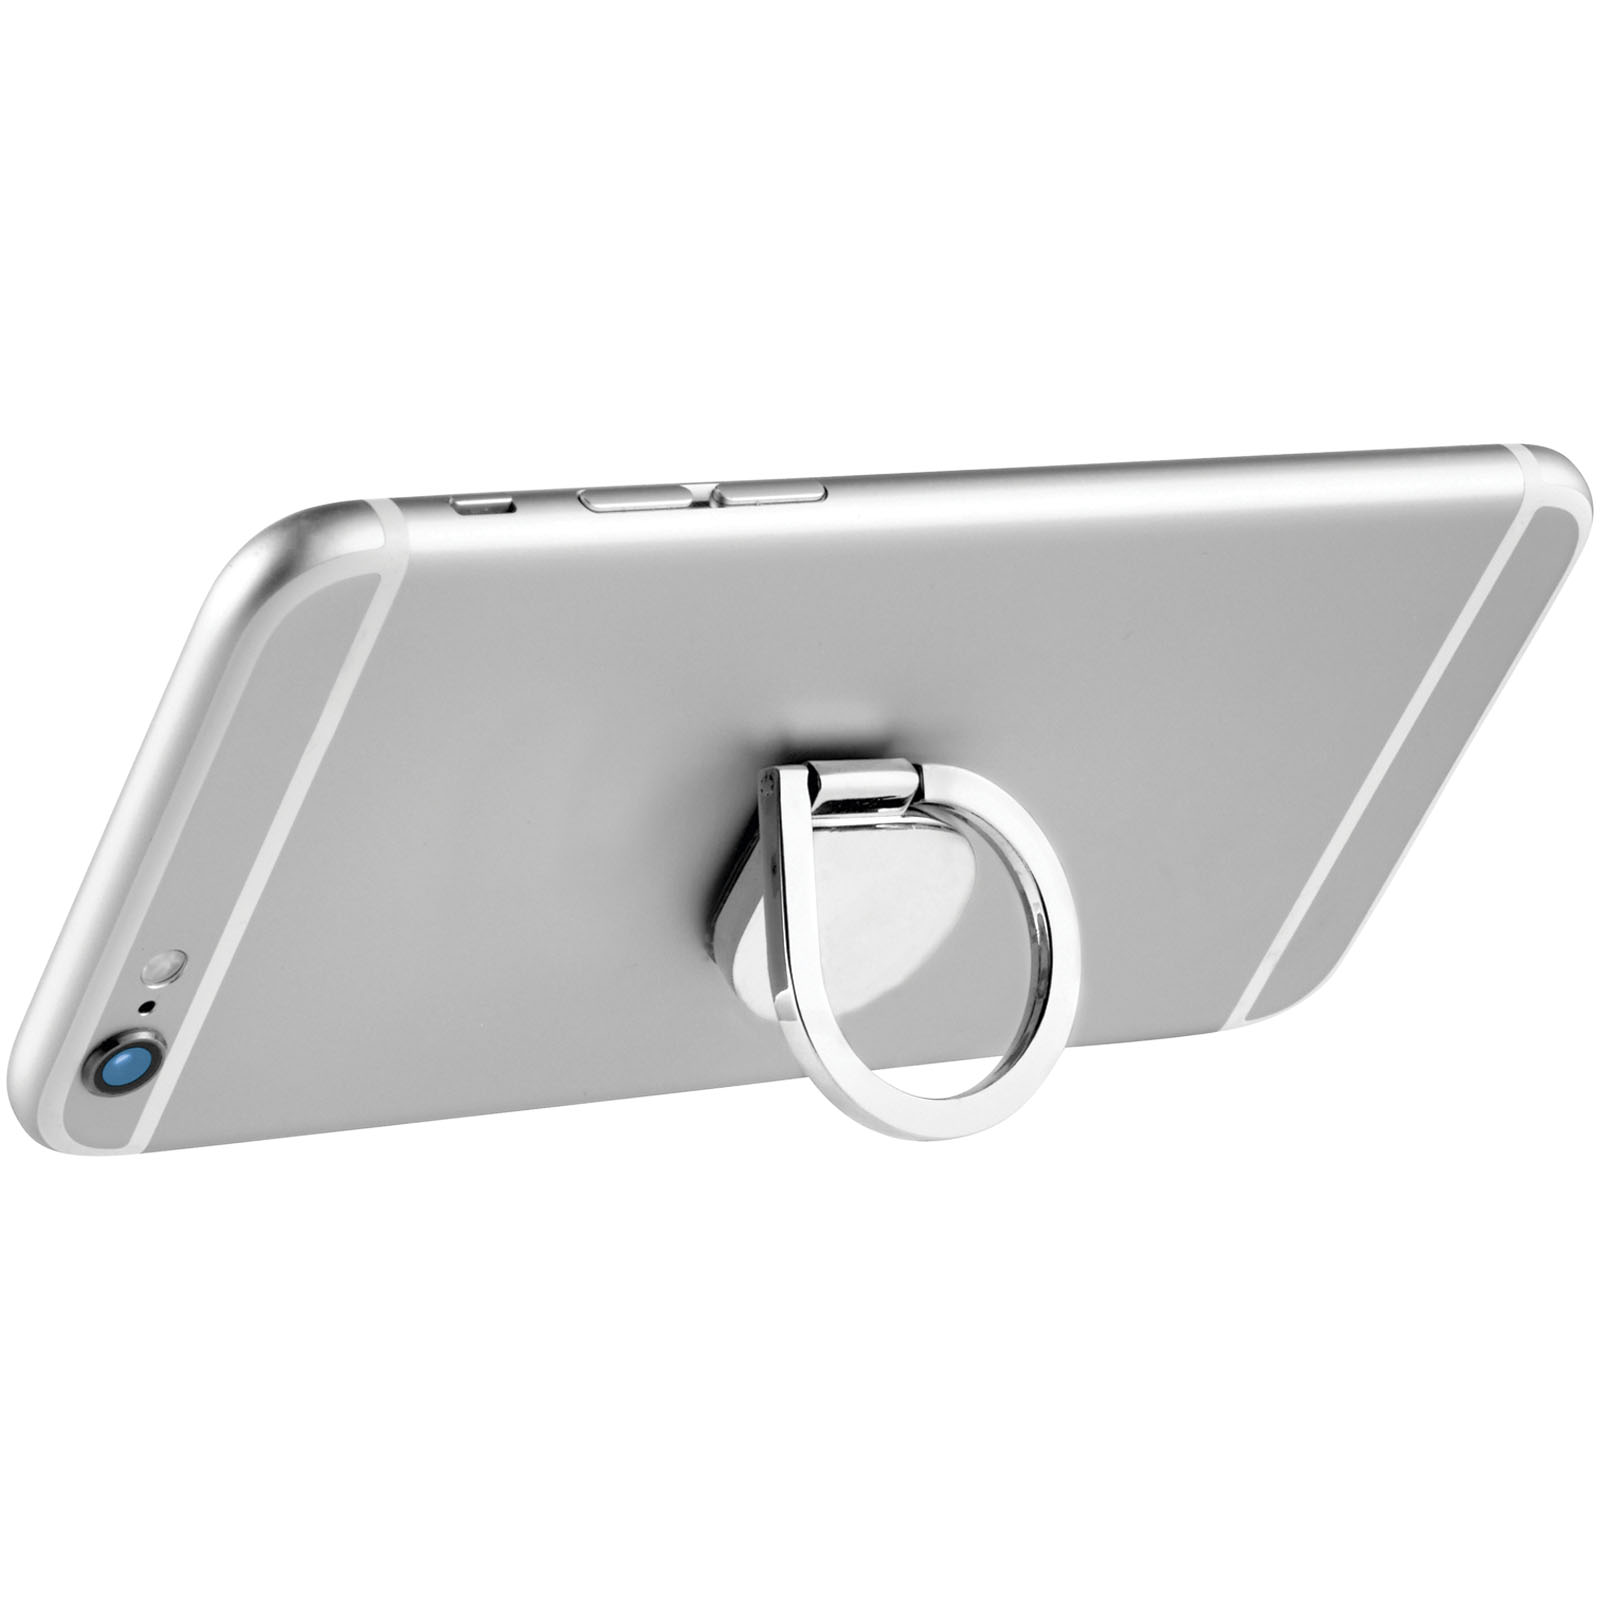 Advertising Telephone & Tablet Accessories - Cell aluminium ring phone holder - 0